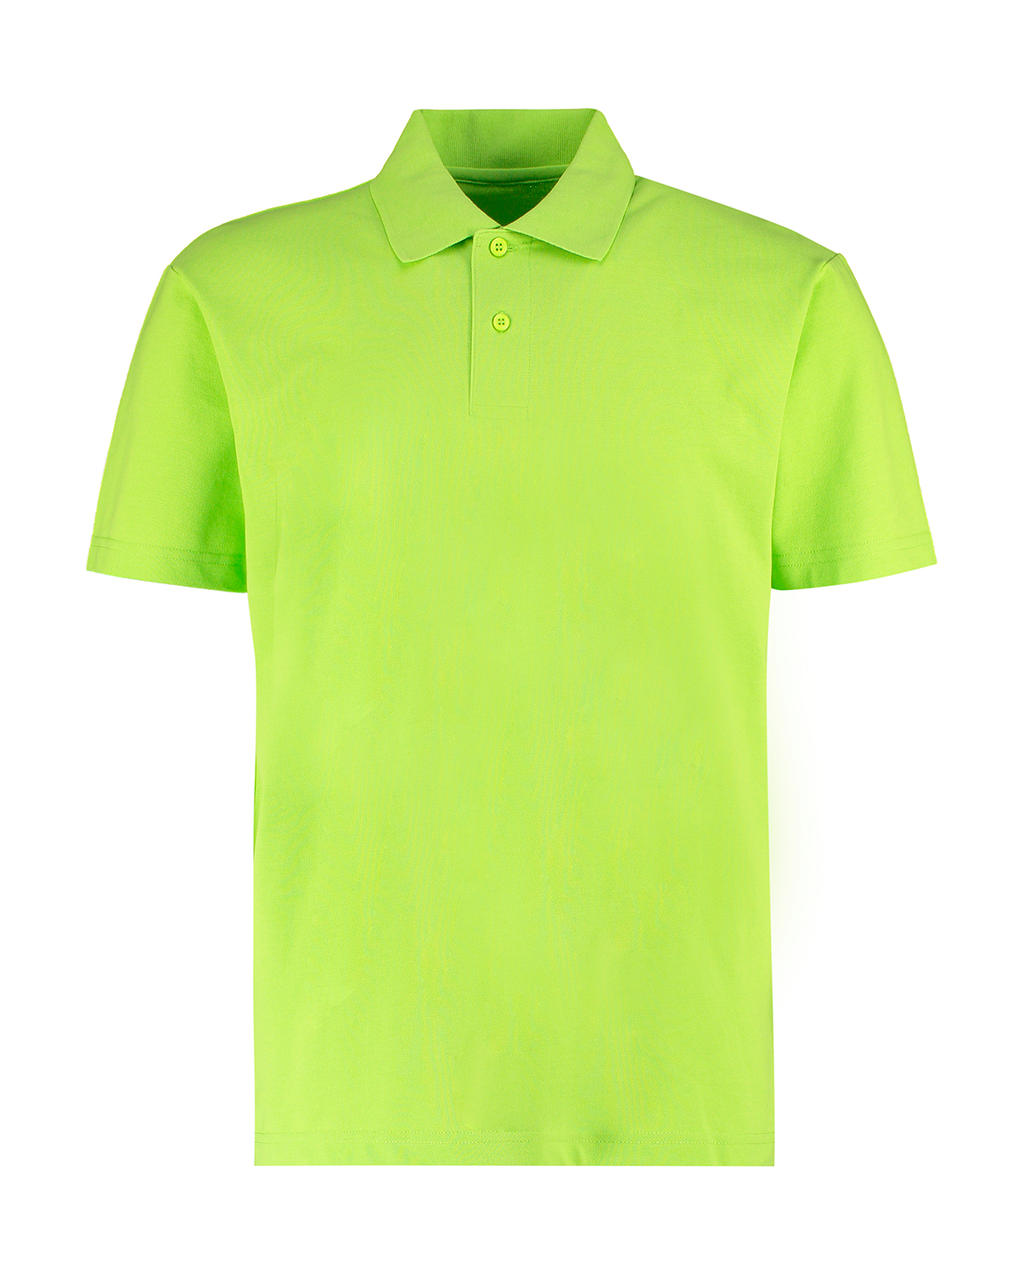  Mens Regular Fit Workforce Polo in Farbe Lime